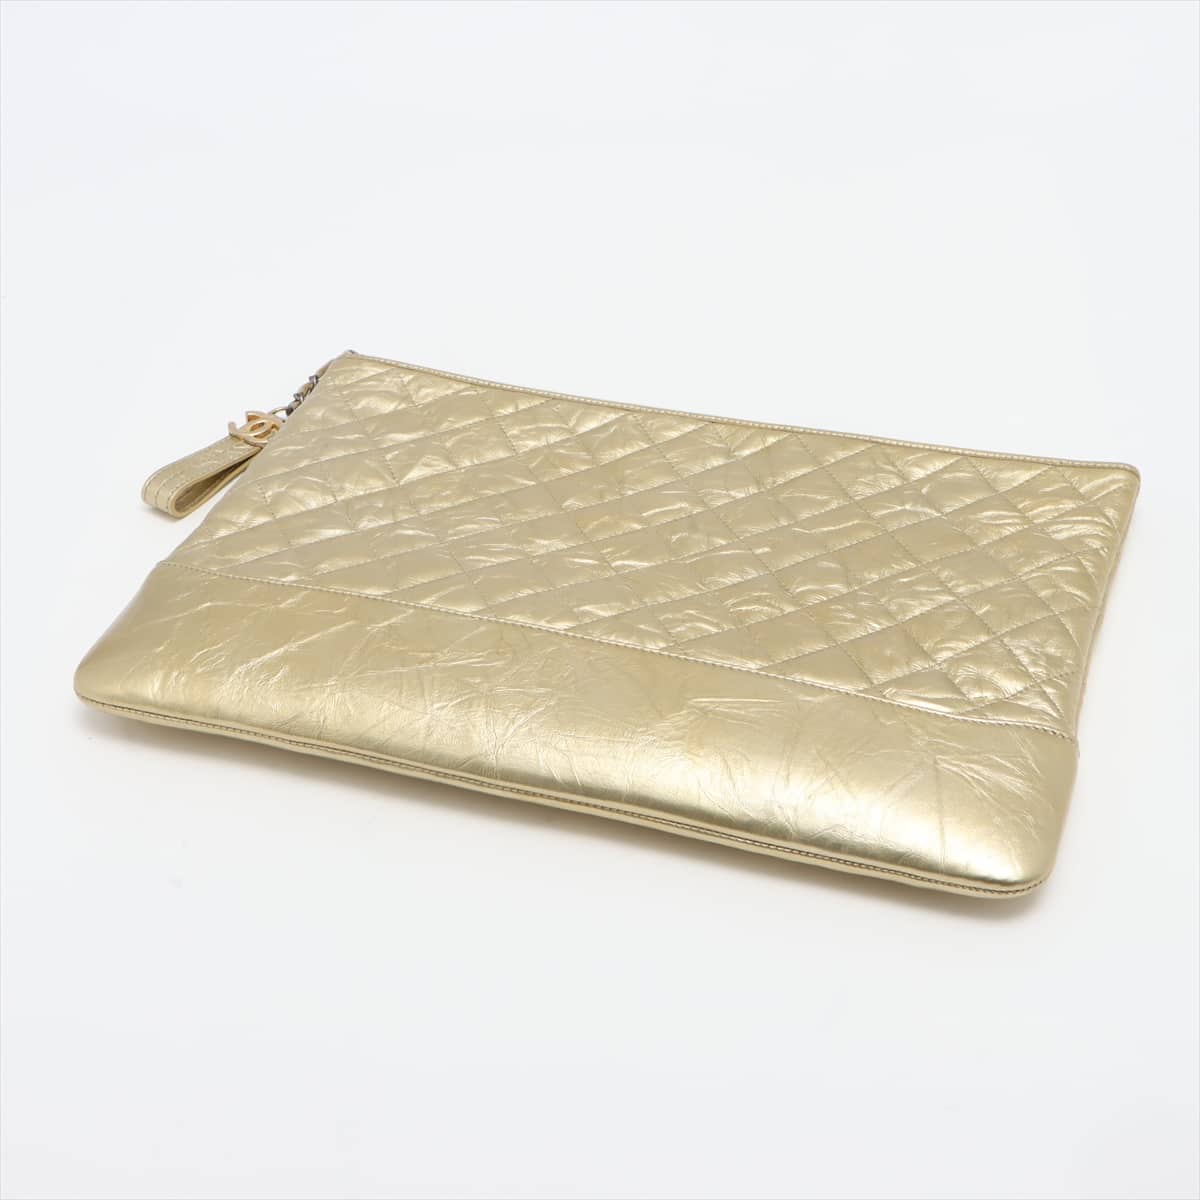 Chanel Gabrielle Doo Chanel Leather Clutch bag Matelasse Gold Silver Metal fittings 25XXXXXX